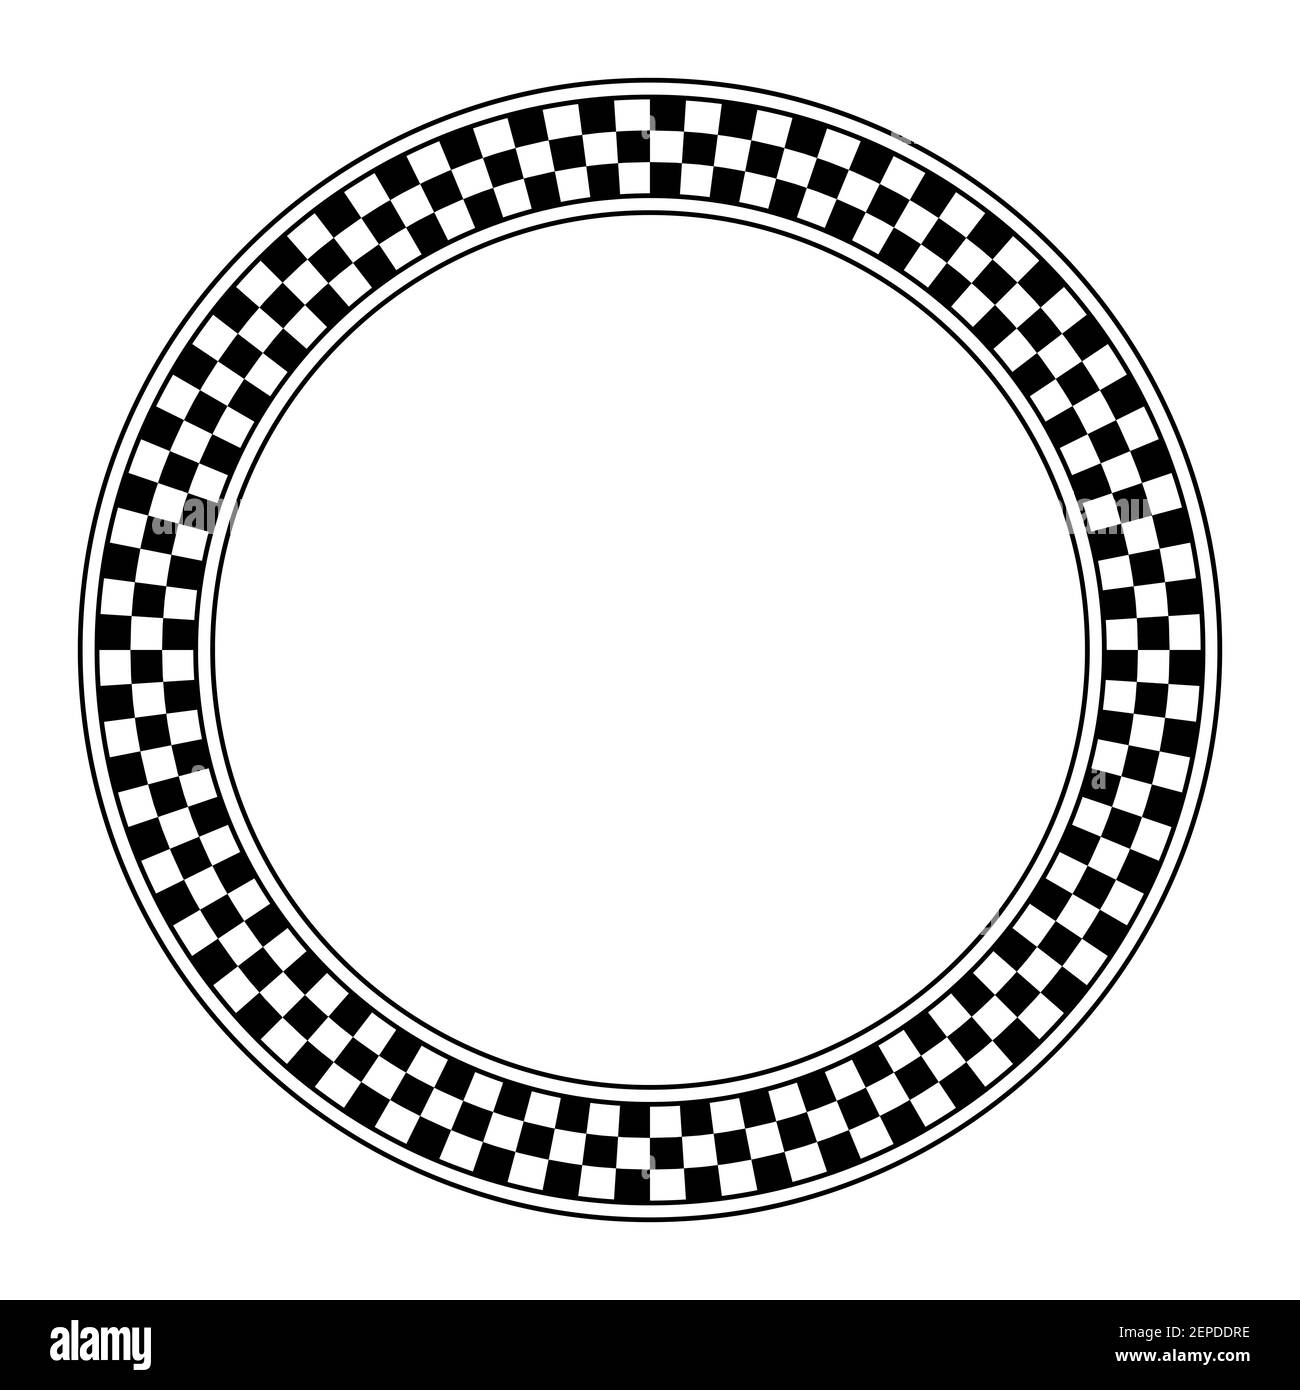 Circle frame with checkered pattern. Round border with checkerboard pattern, made of a checkerboard diagram. Stock Photo